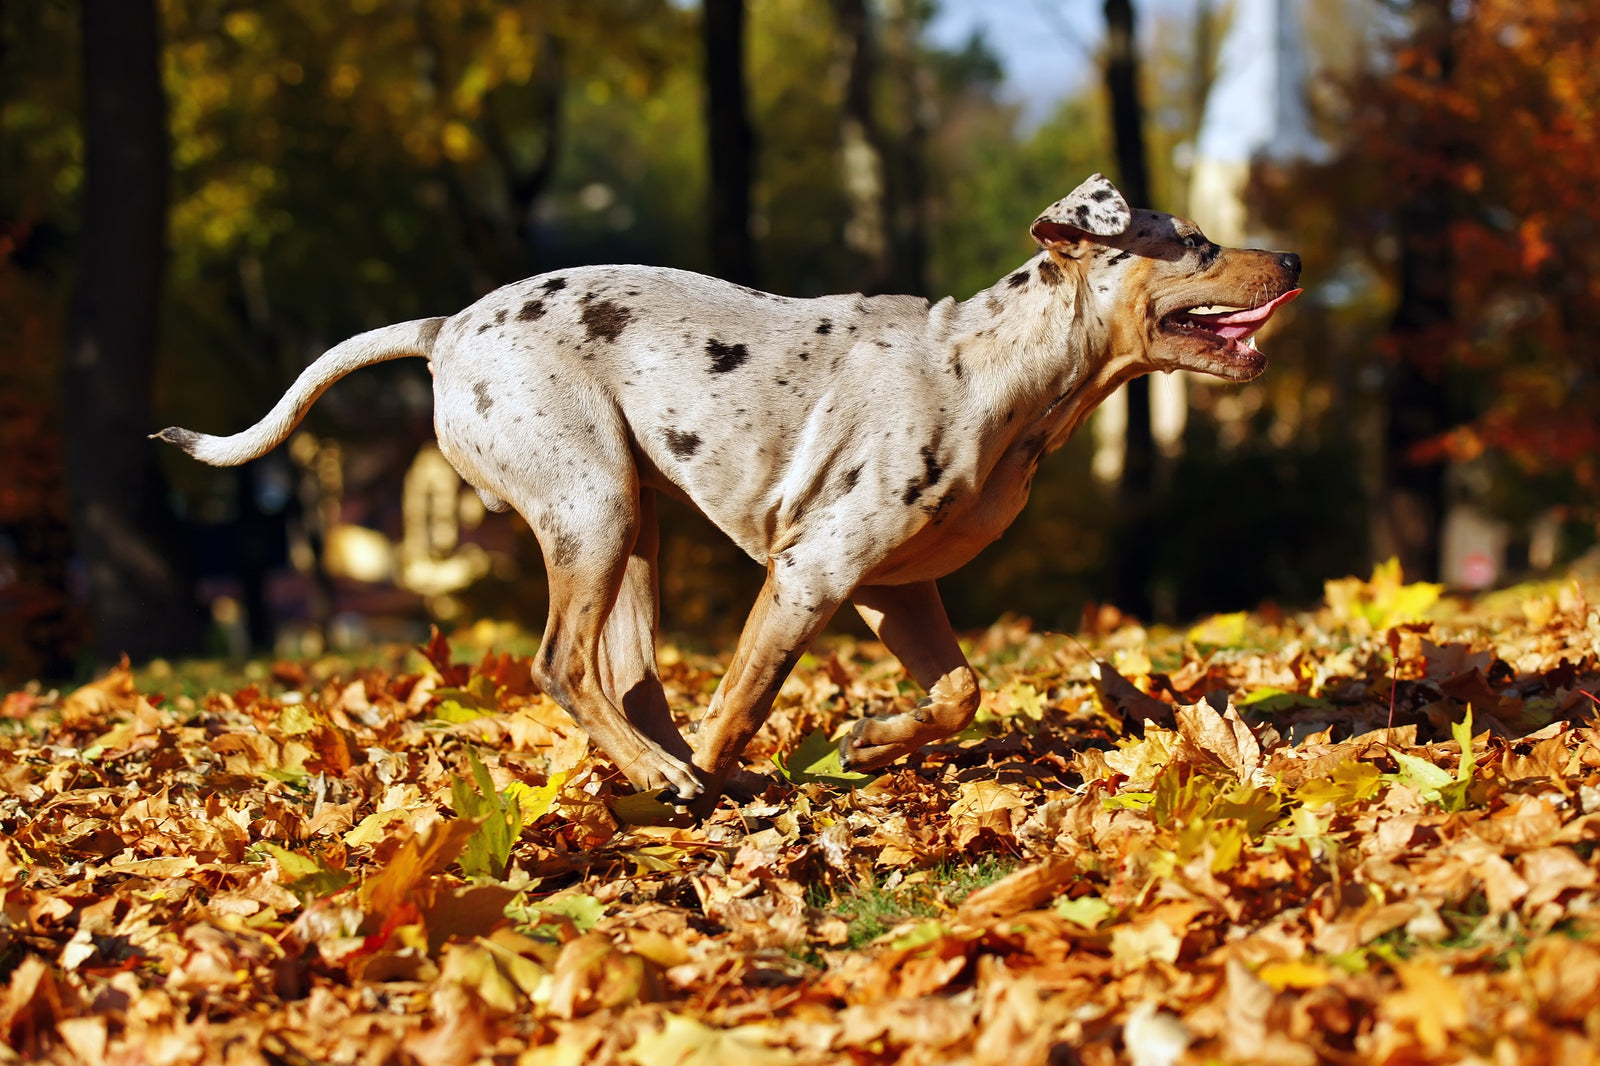 Exercise a dog: Consider age, breed, and overall health